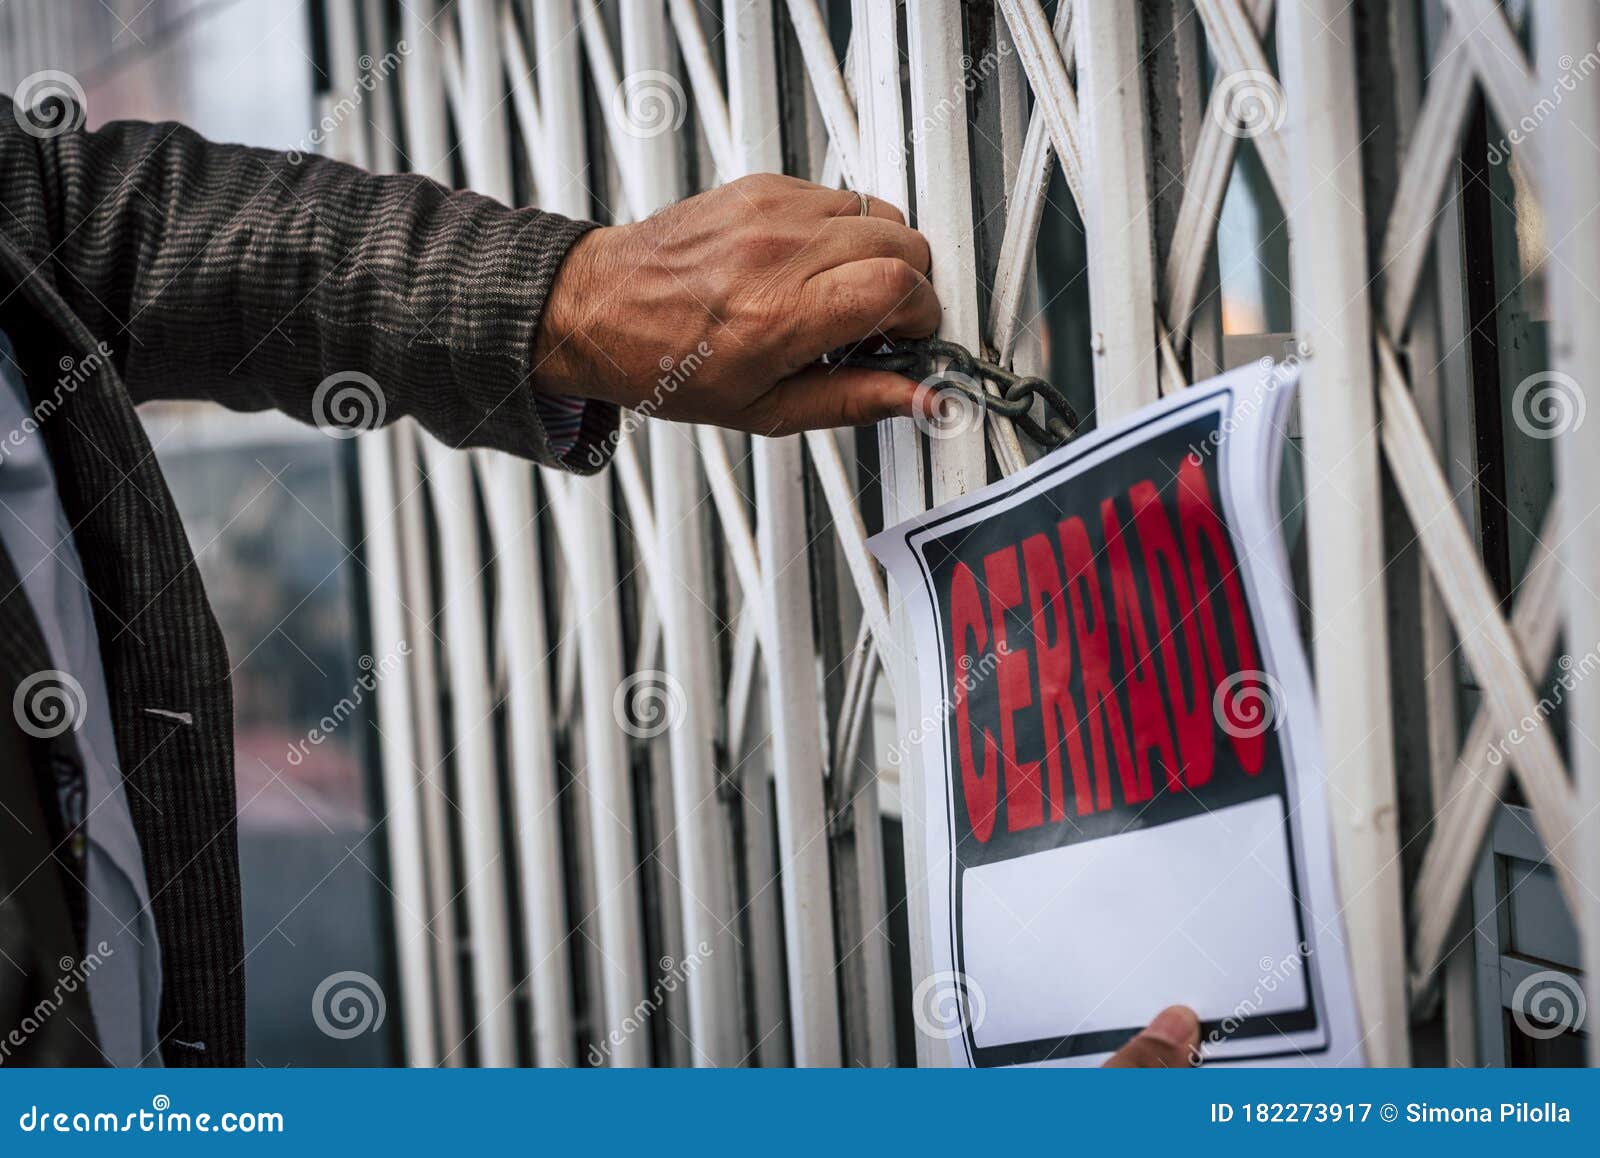 close up of owner man with closed sign out of his store shop - end of business economy concept - spanish words cerrado panel and